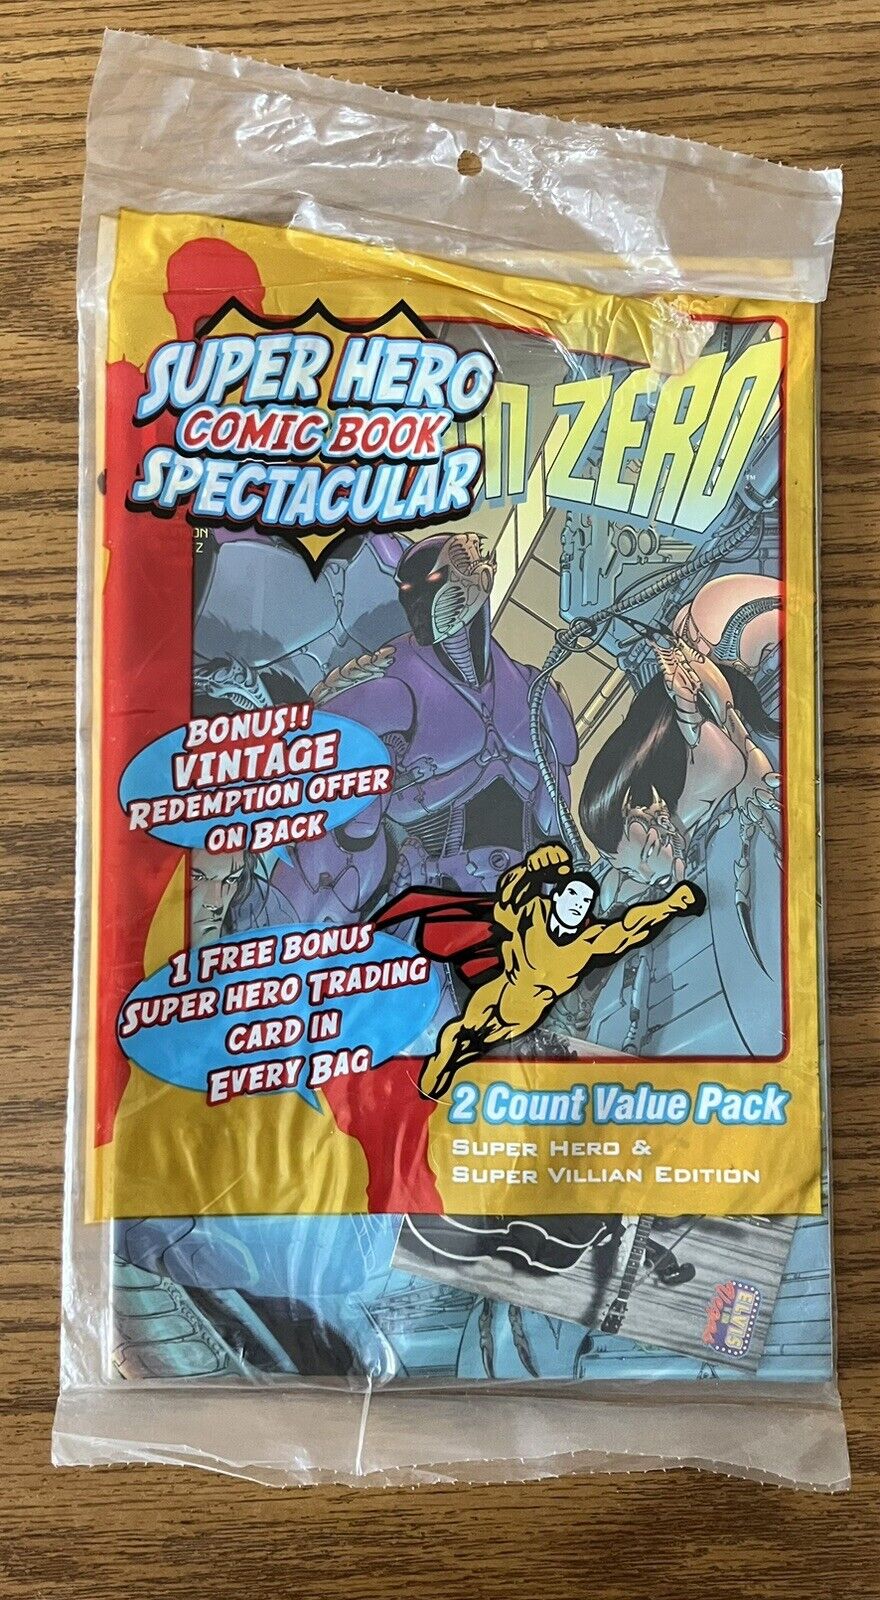 super hero comic book spectacular, 3 Unopened Packages, 2 Count Value Pack